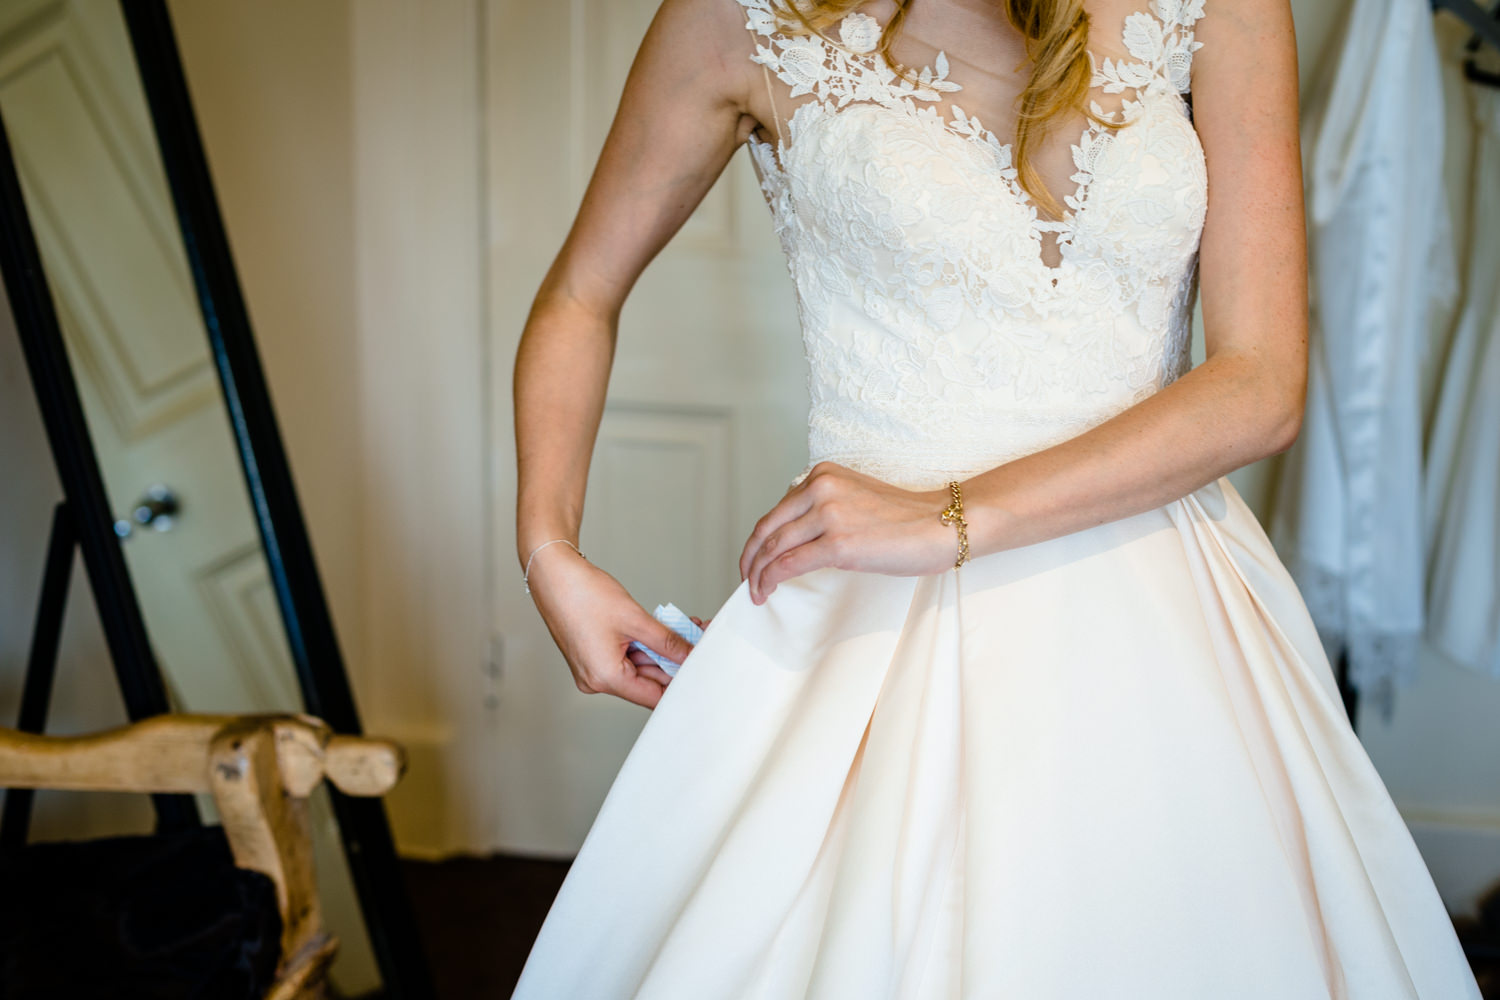 A Mori Lee bridal gown with pockets!